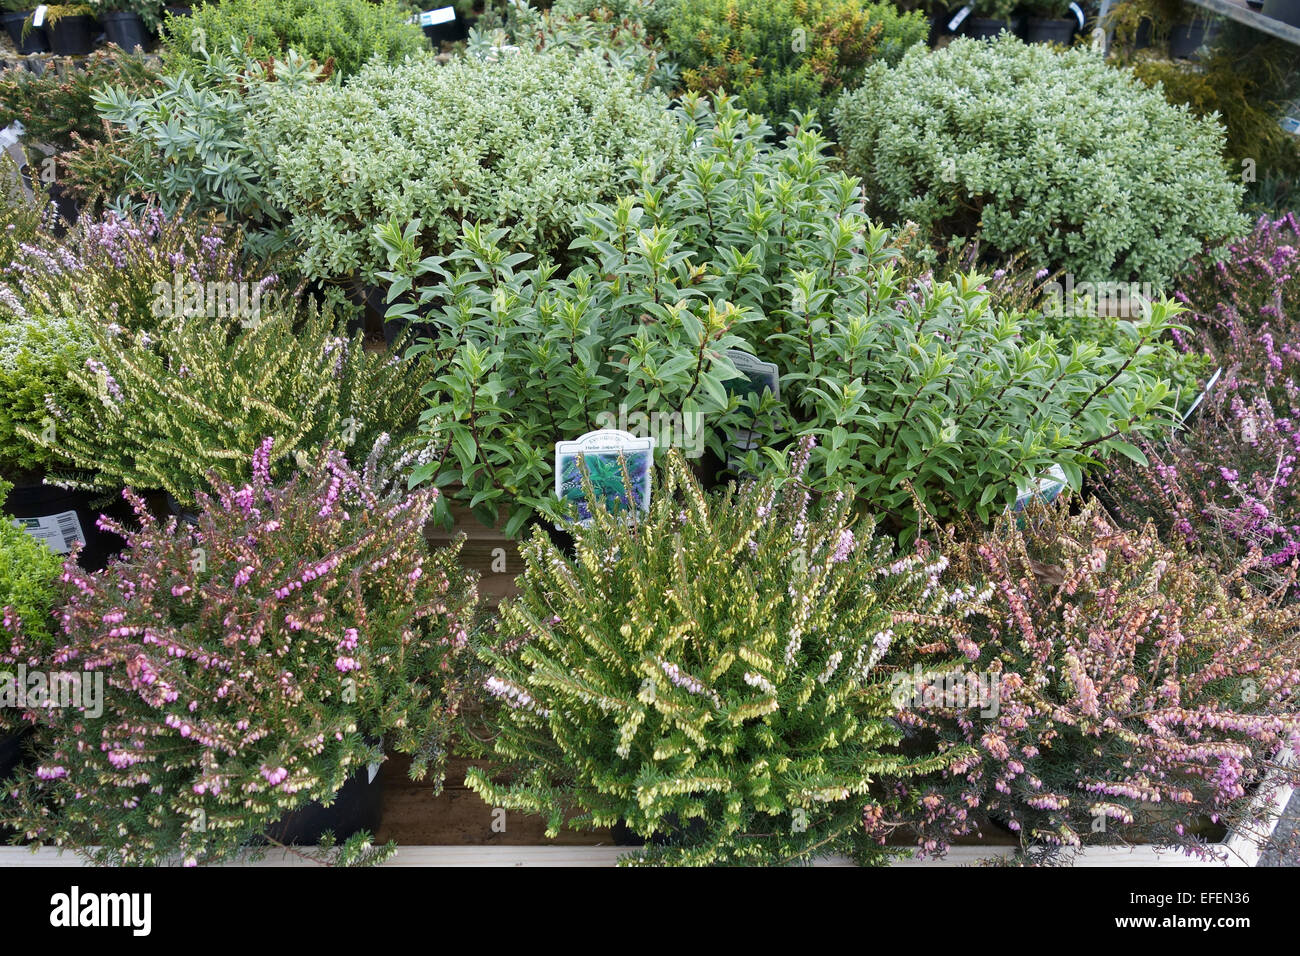 Hebes and Heather on display at a garden centre in the UK Stock Photo